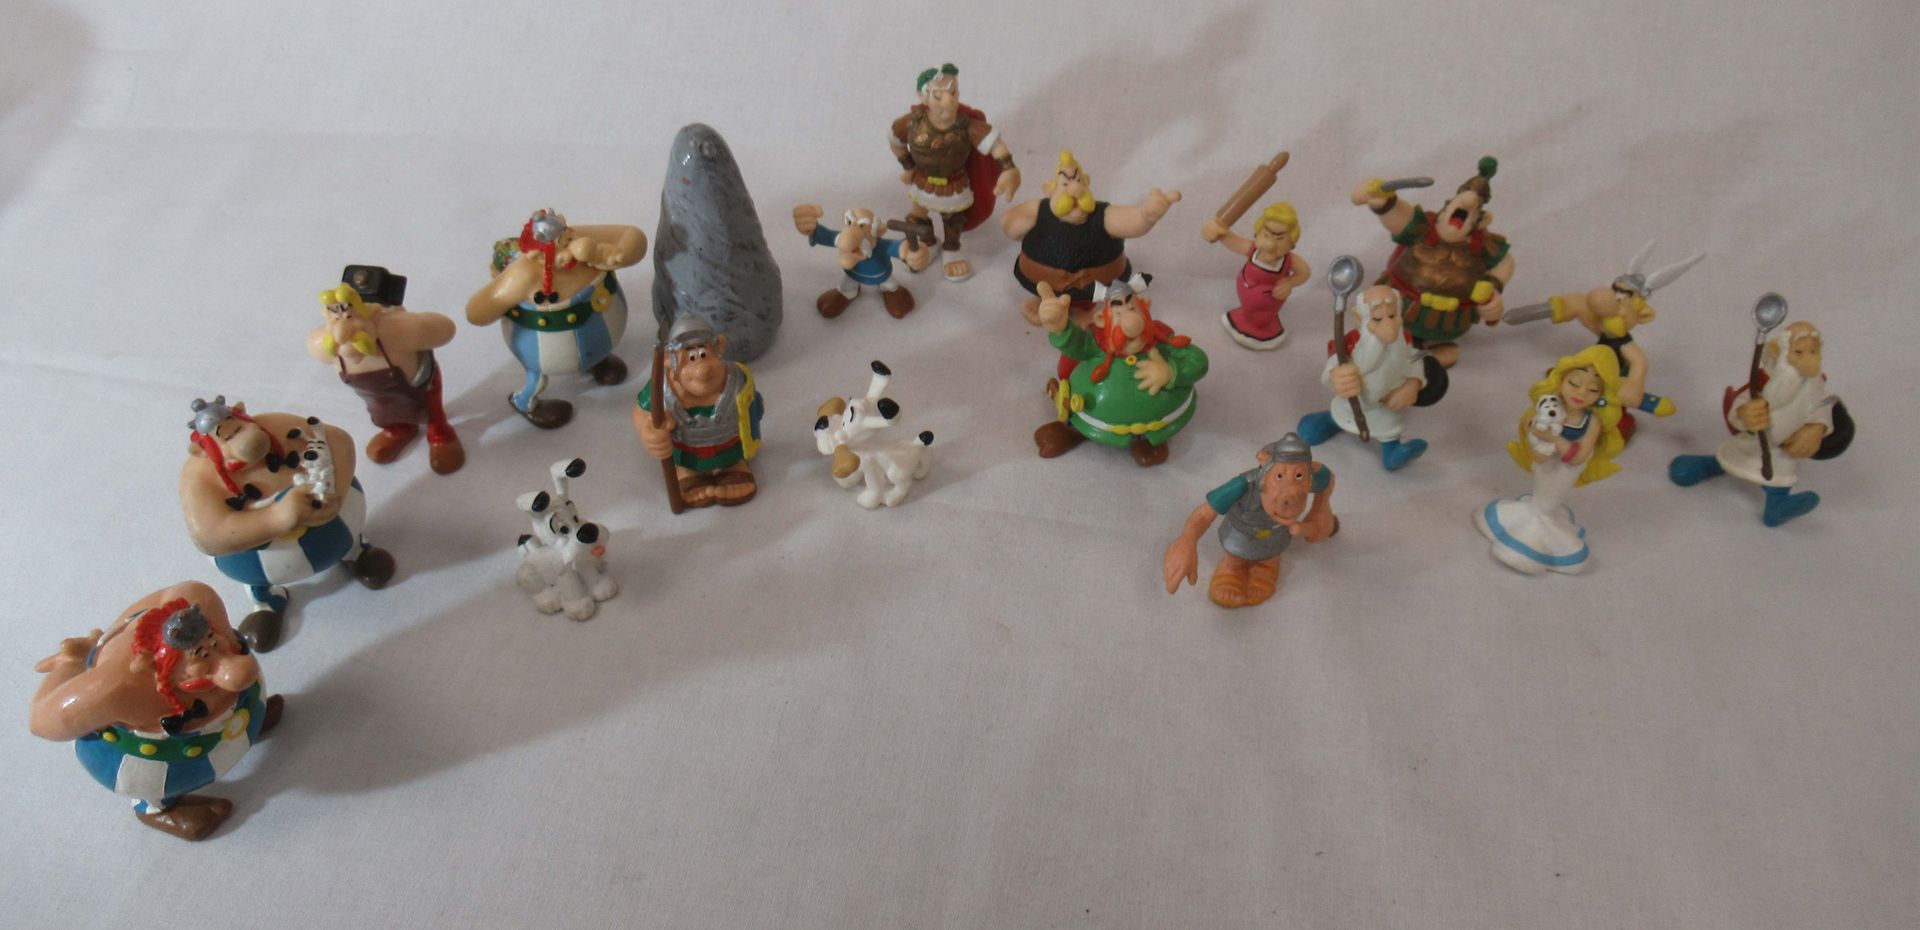 Null GOSCINNY-UDERZO Lot of 20 resin figurines, representing characters of the A&hellip;